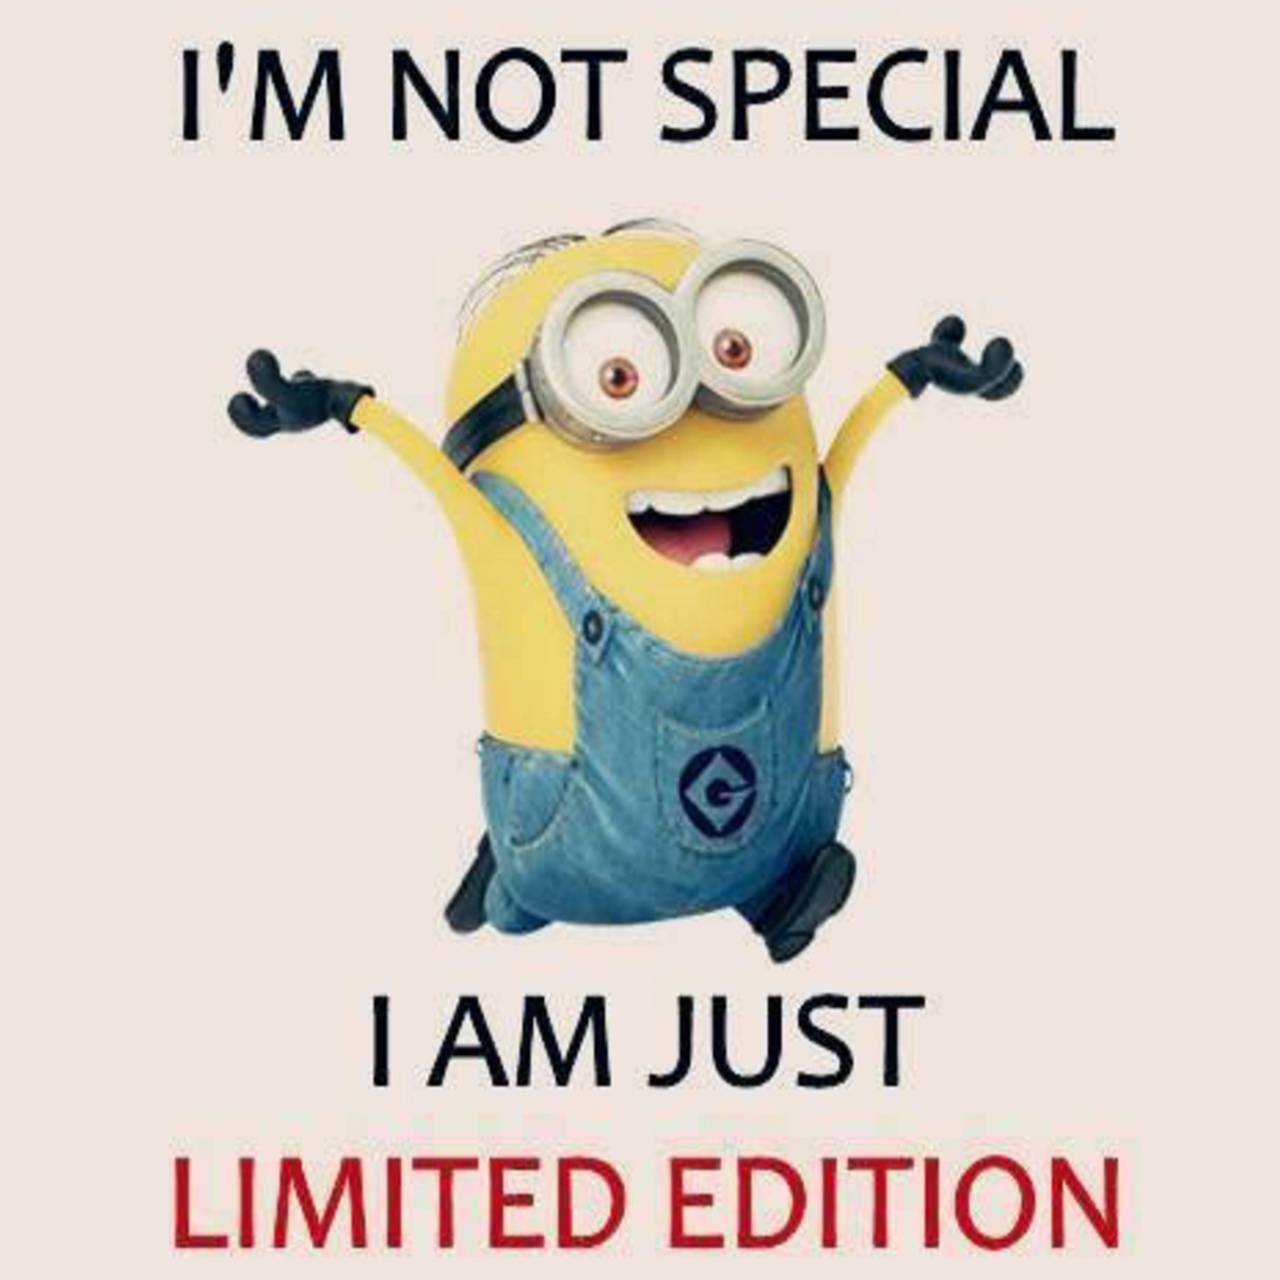 20 Cute and Funny Minion Quotes 